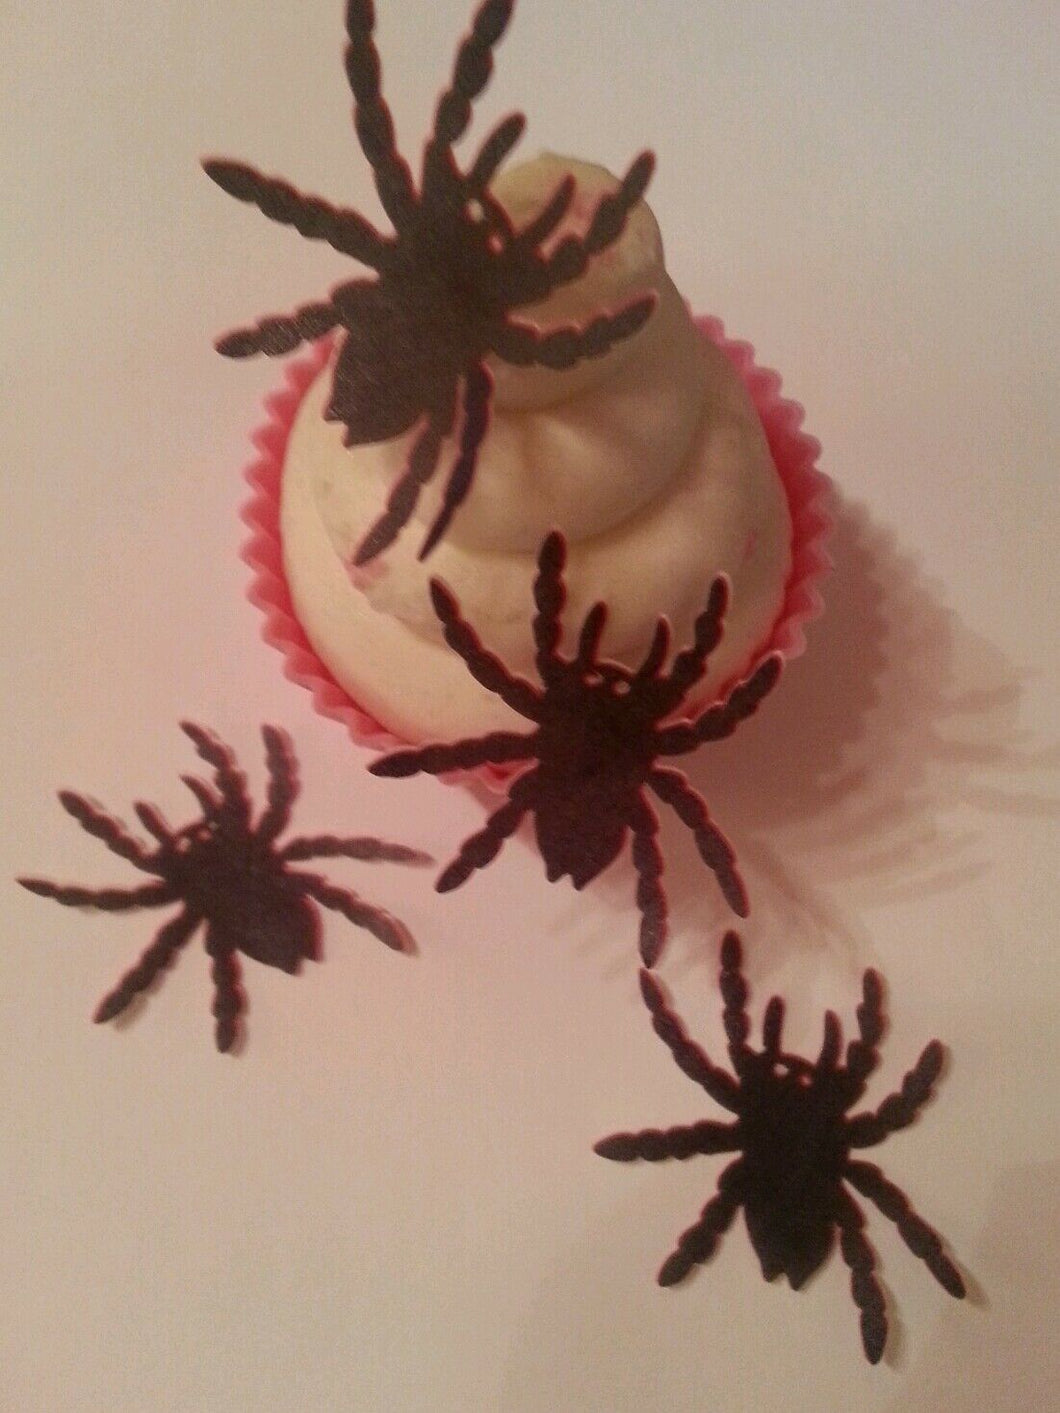 12 PRECUT Edible Halloween Spiders wafer/rice paper cake/cupcake toppers